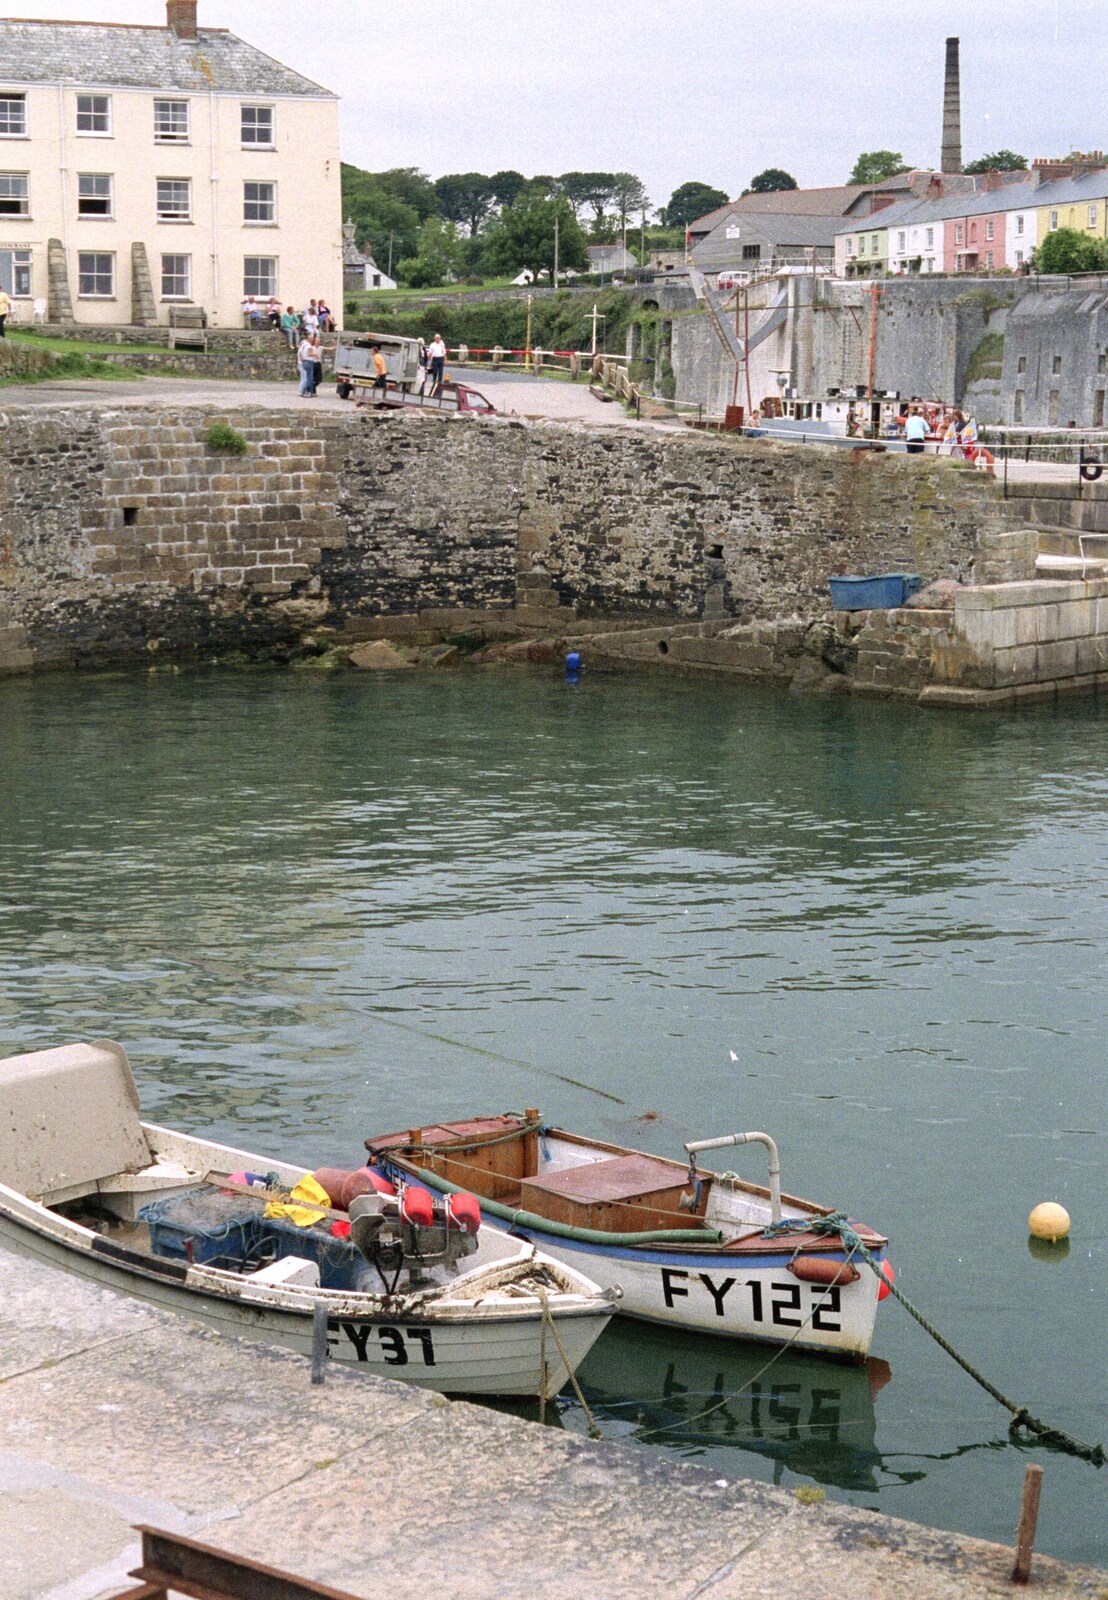 A mystery harbour somewhere from Plymouth and The Chapel, Hoo Meavy, Devon - 25th July 1991